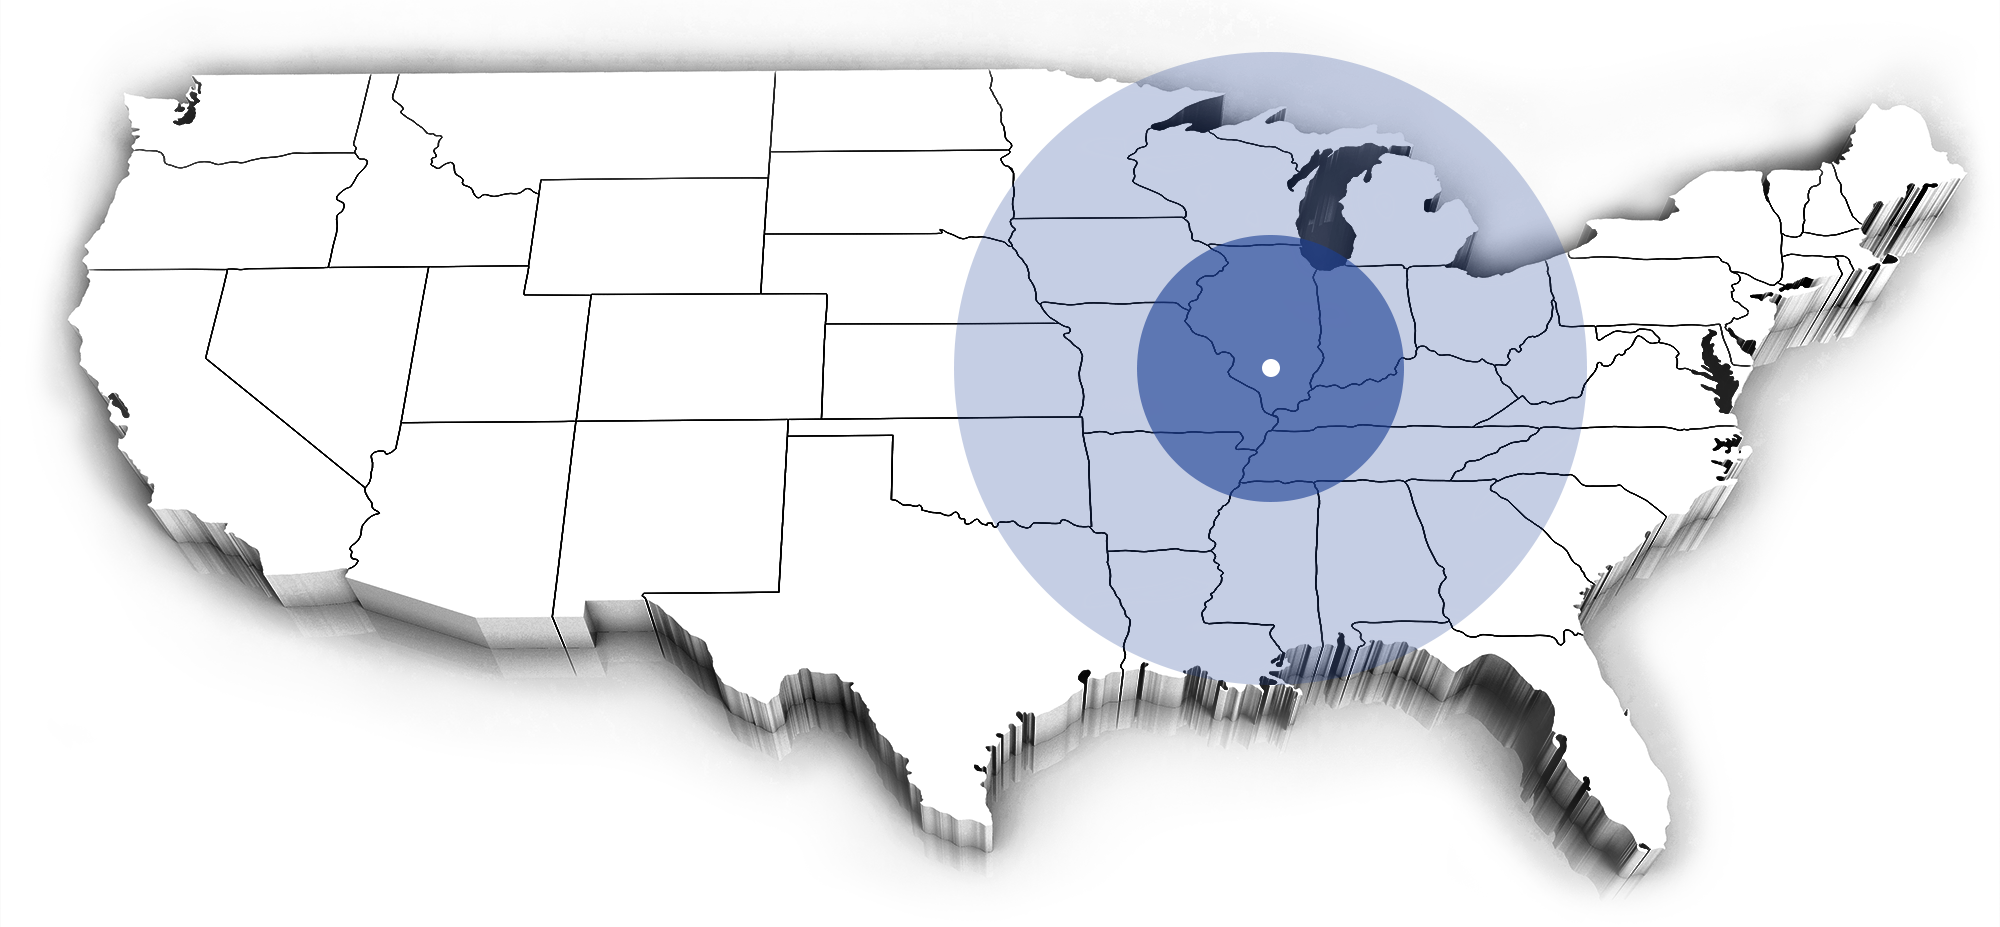 Extruded view of the United States Illustrating the Geographical Reach of Shores Builders